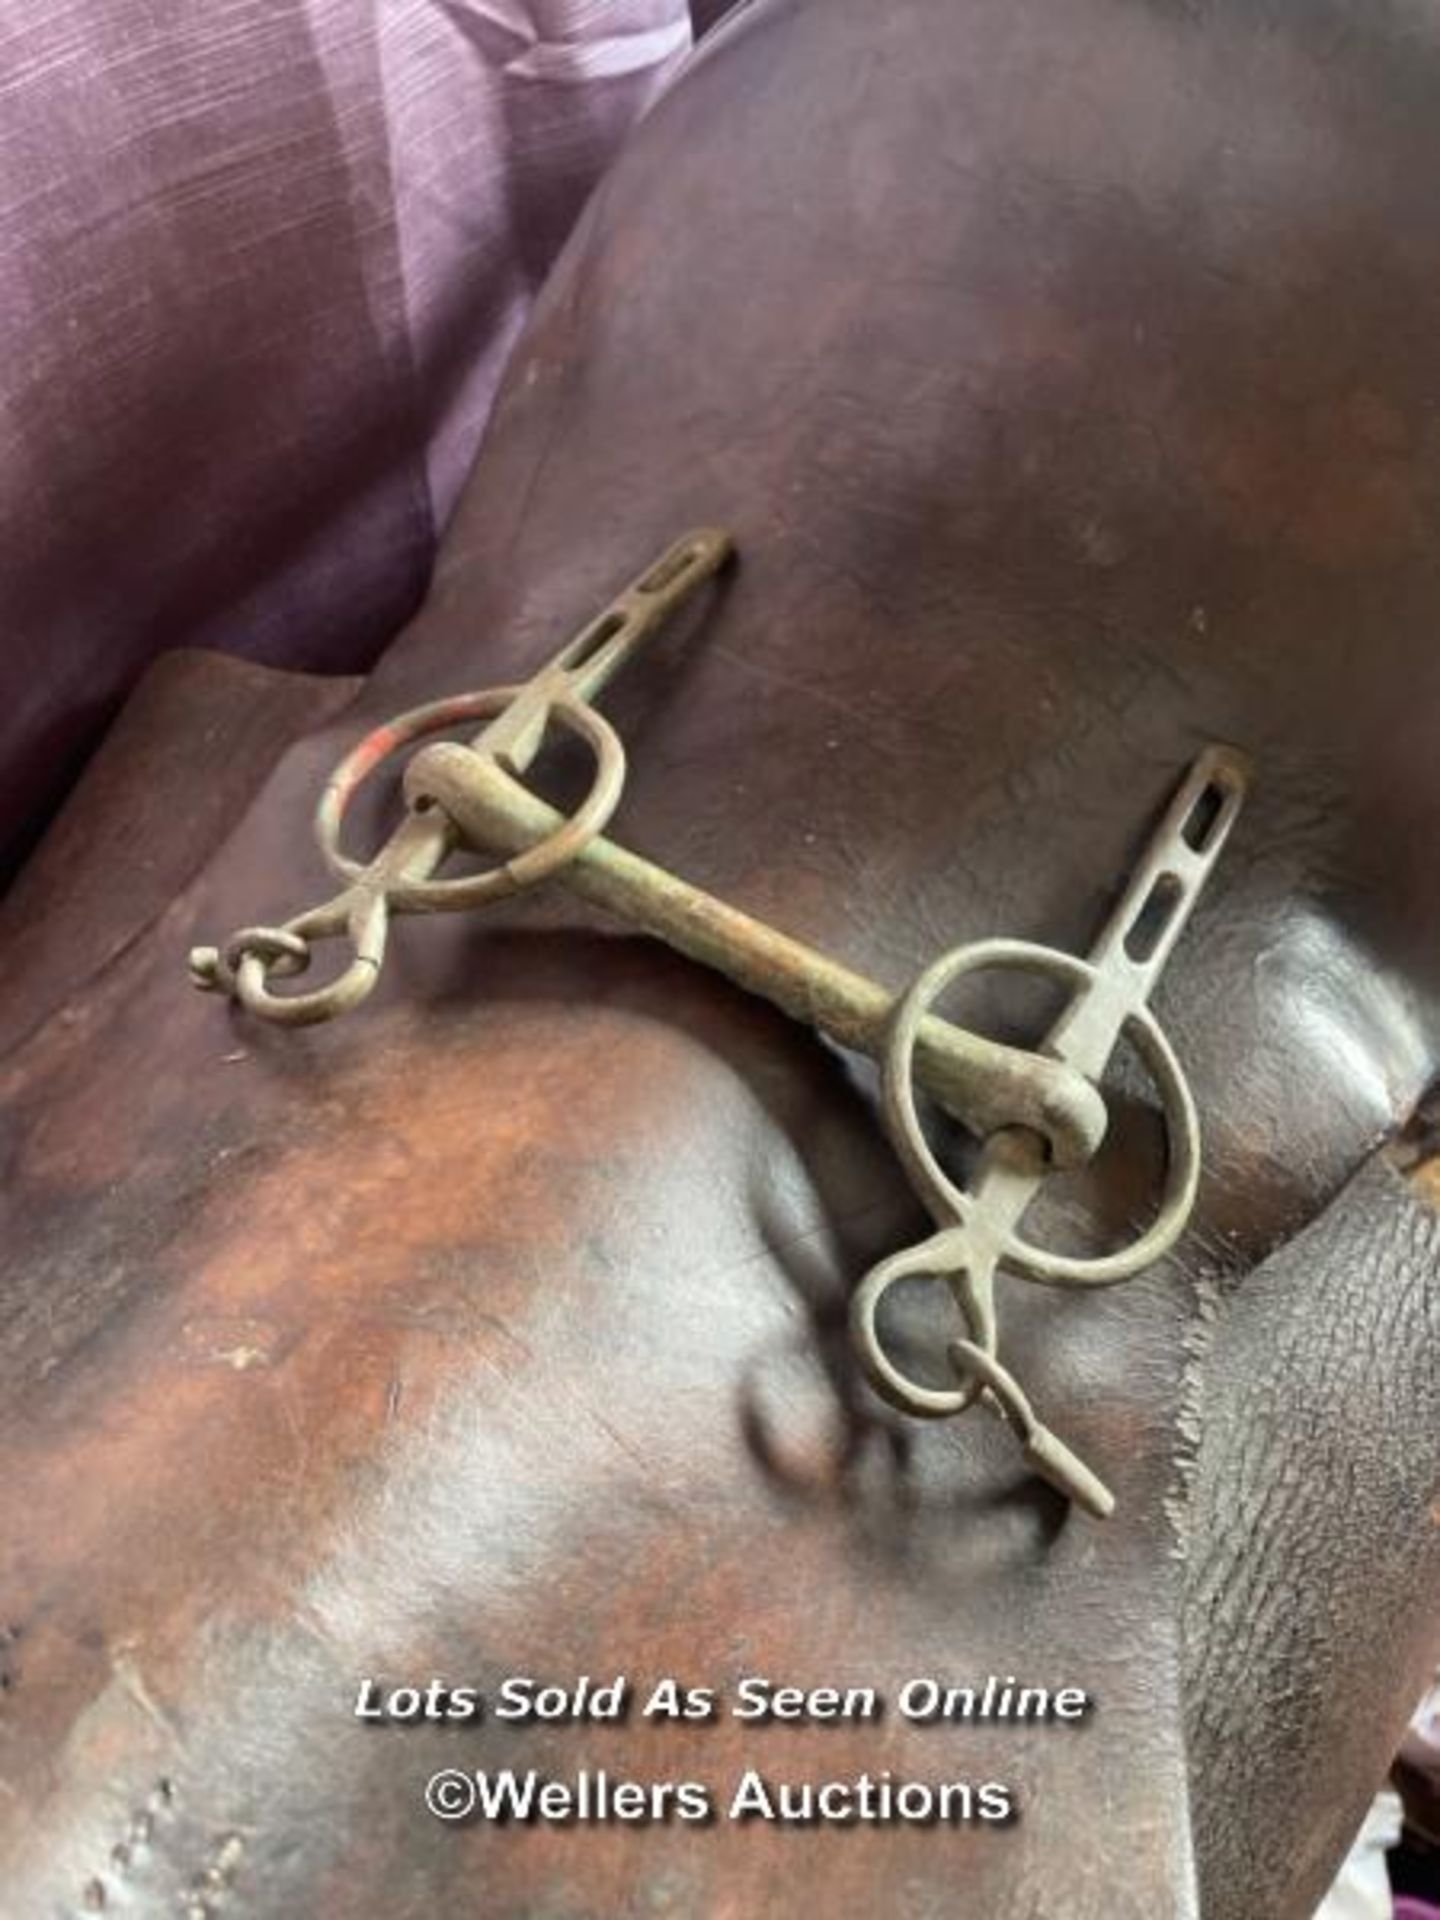 CIRCA 1900, BOER WAR PERIOD MILITARY SADDLE WITH ASSOCIATED HORSE BIT AND HARNESS - Image 3 of 4